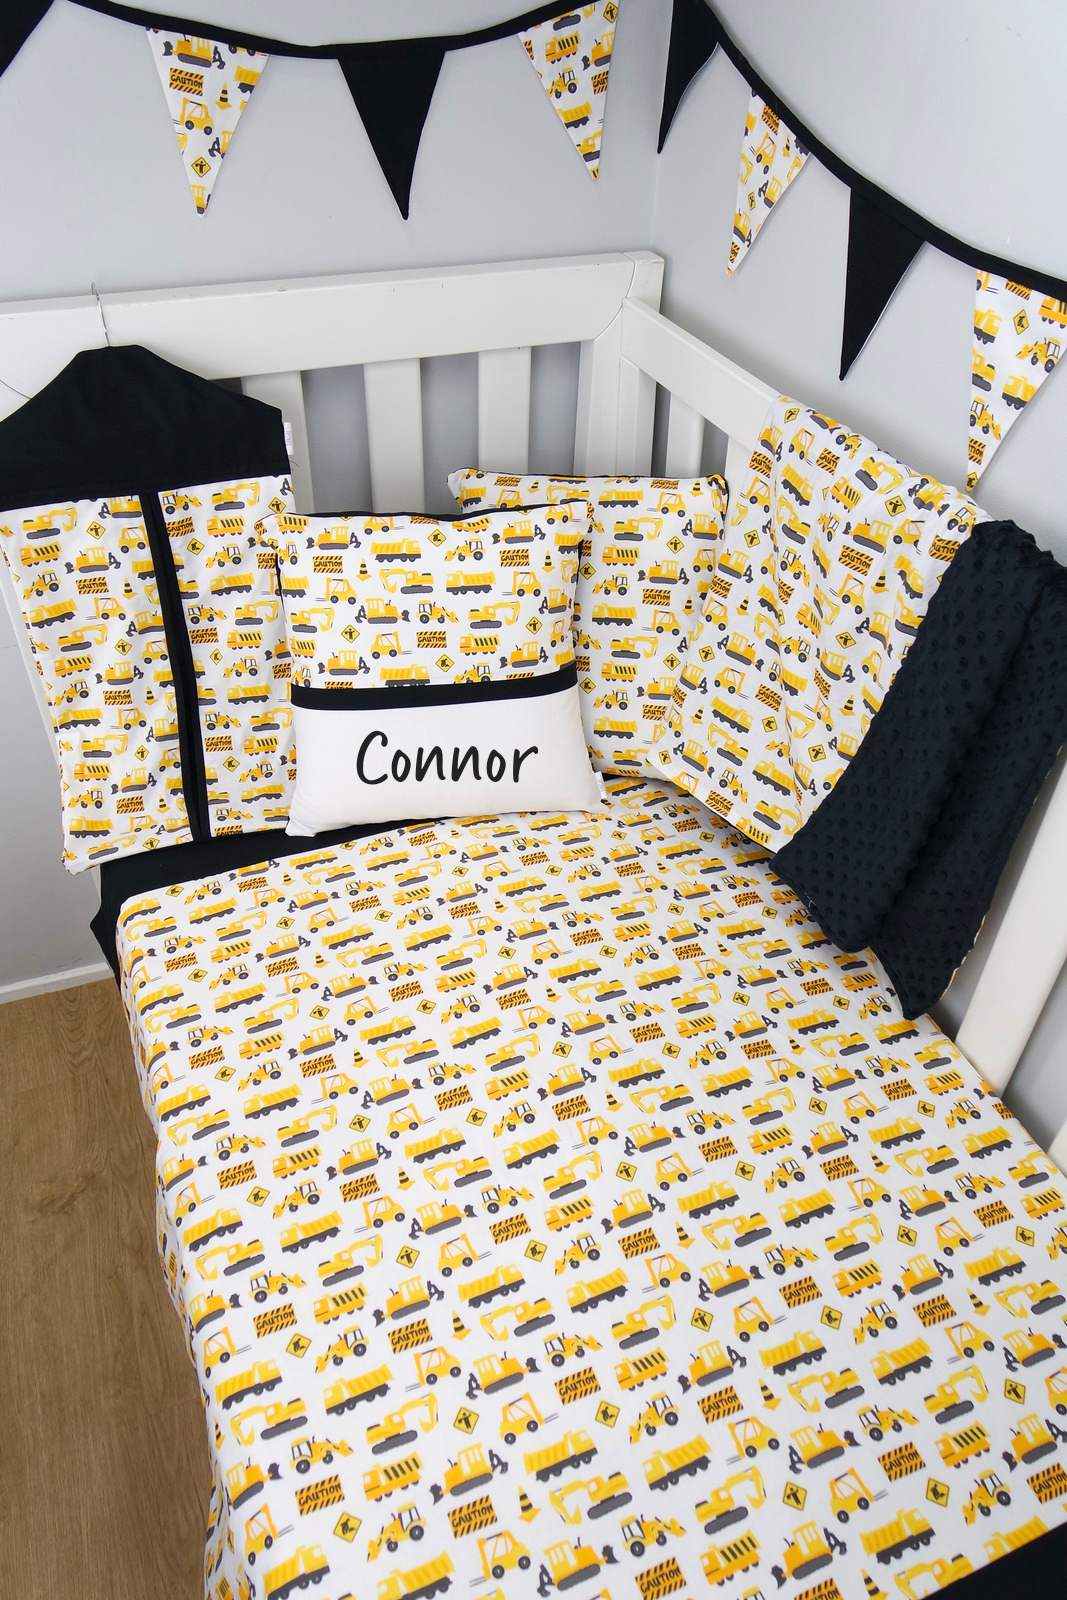 100% Cotton Cot/Bassinet Fitted Sheet or Change Table Cover - Little Construction